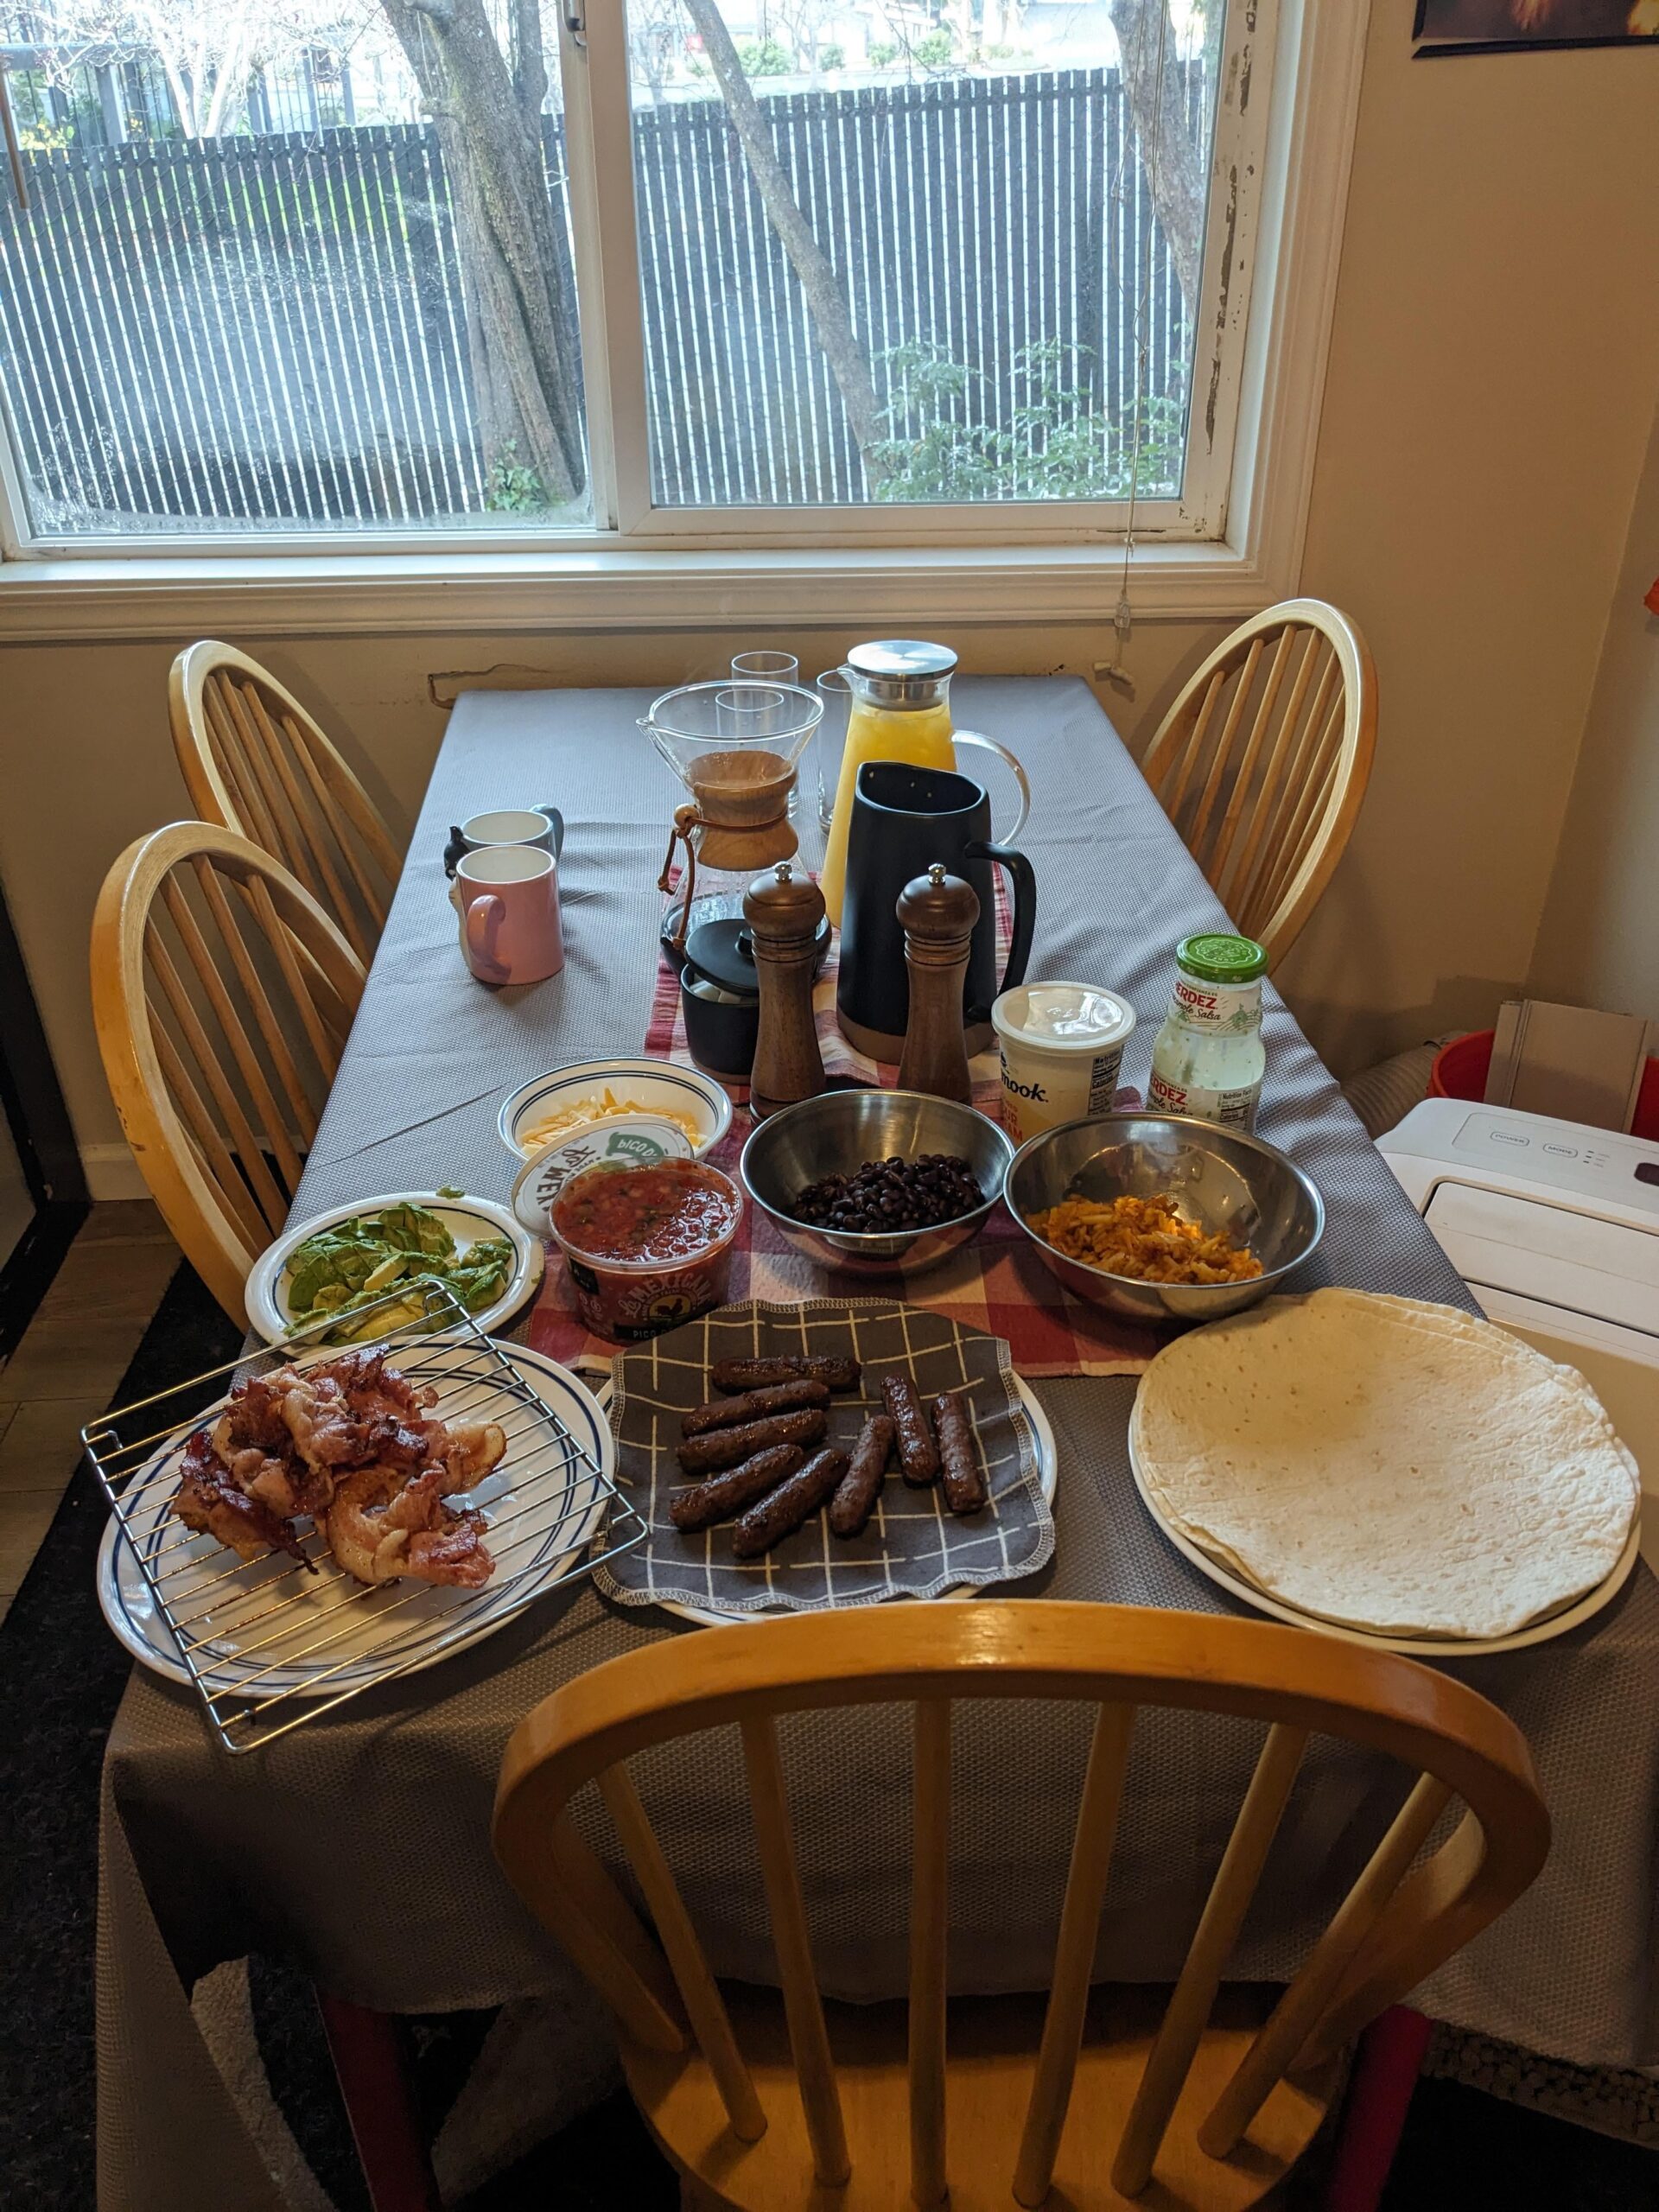 Breakfast Burrito Bar I made for friends this weekend. - Dining and Cooking